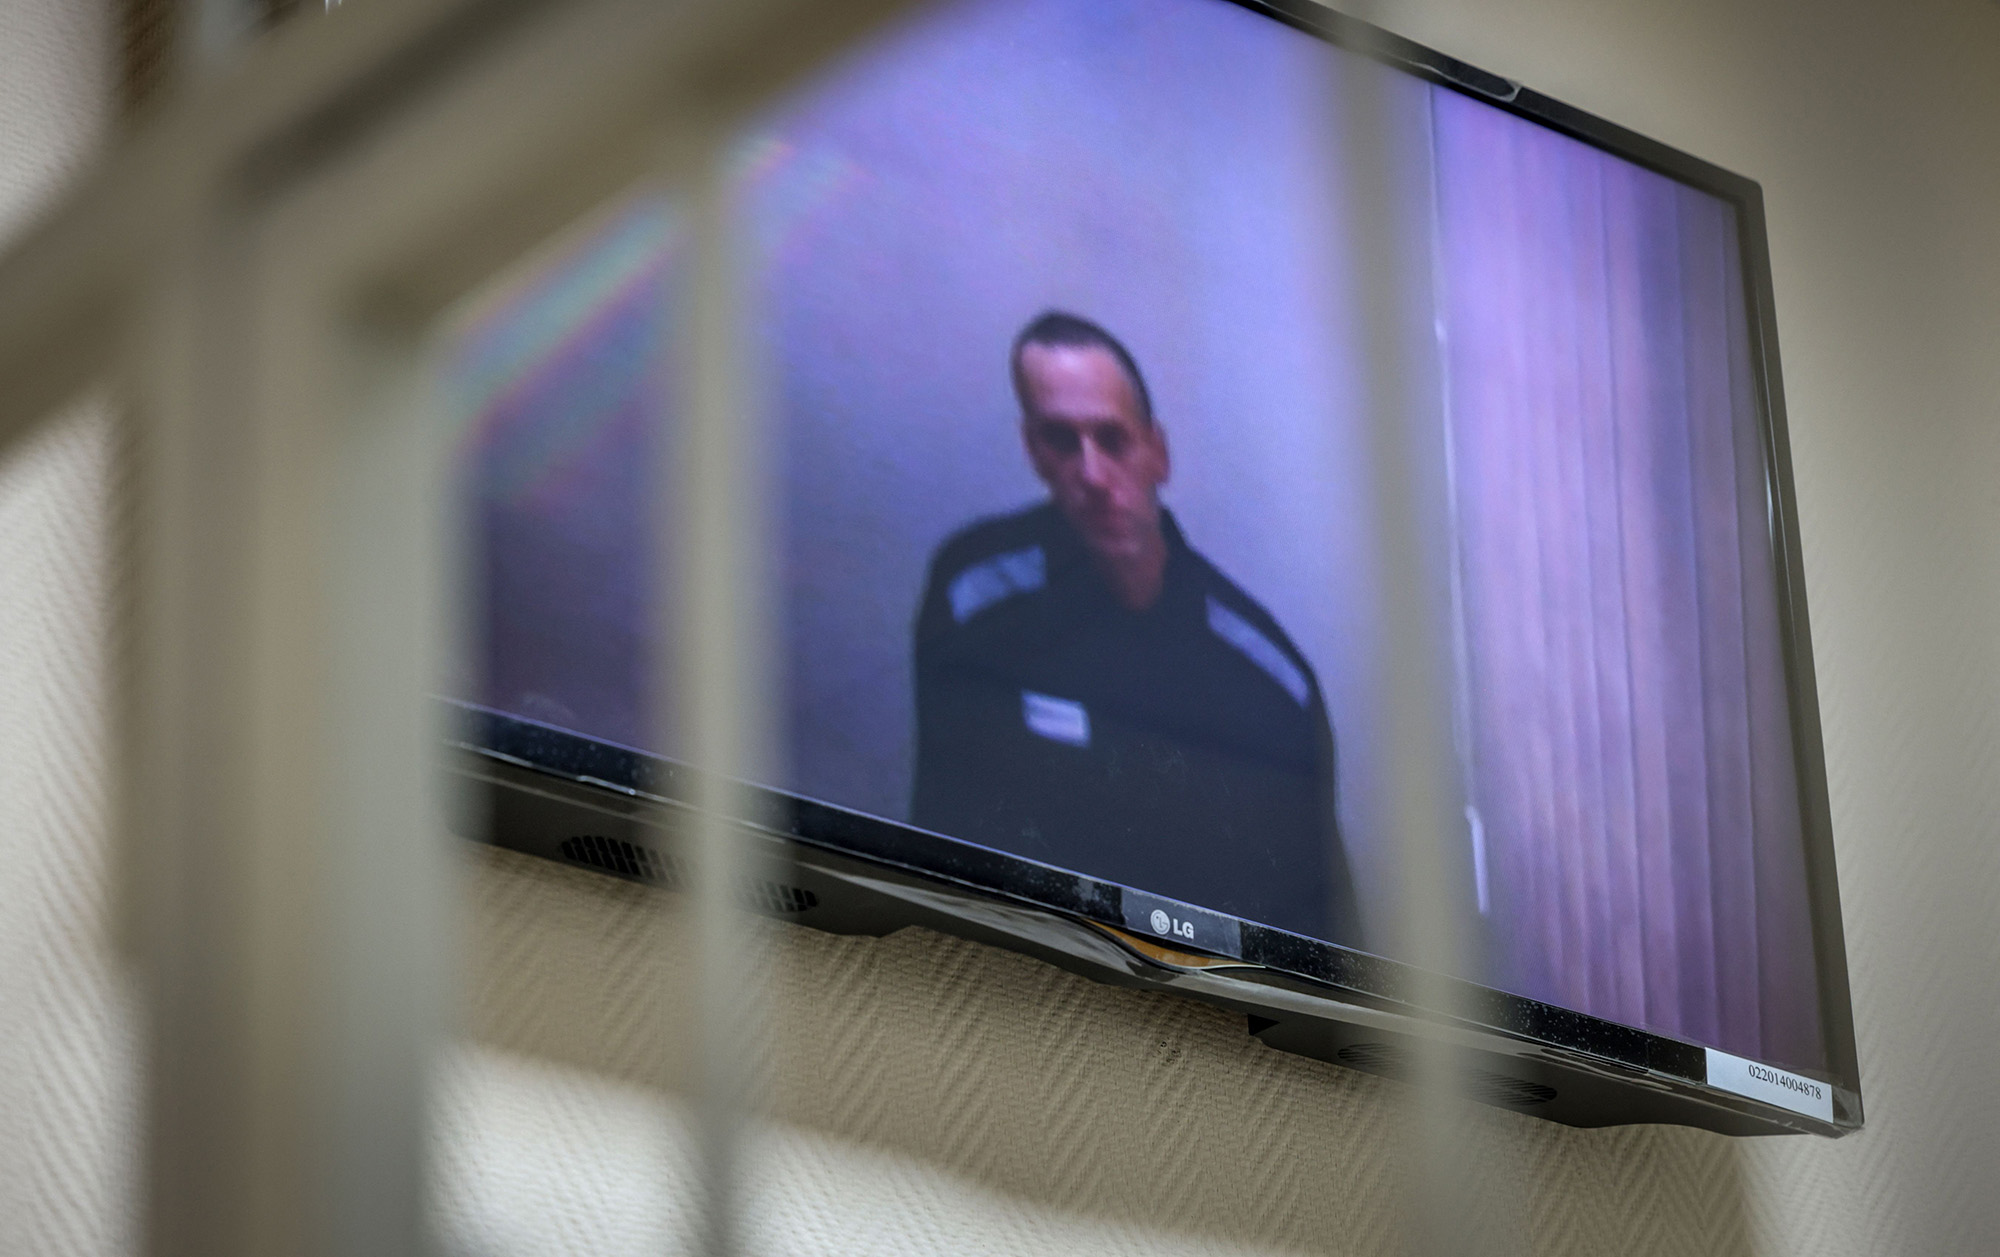 Jailed Kremlin critic Alexei Navalny appears on screen via a video link from prison during a court hearing on May 26, 2021.